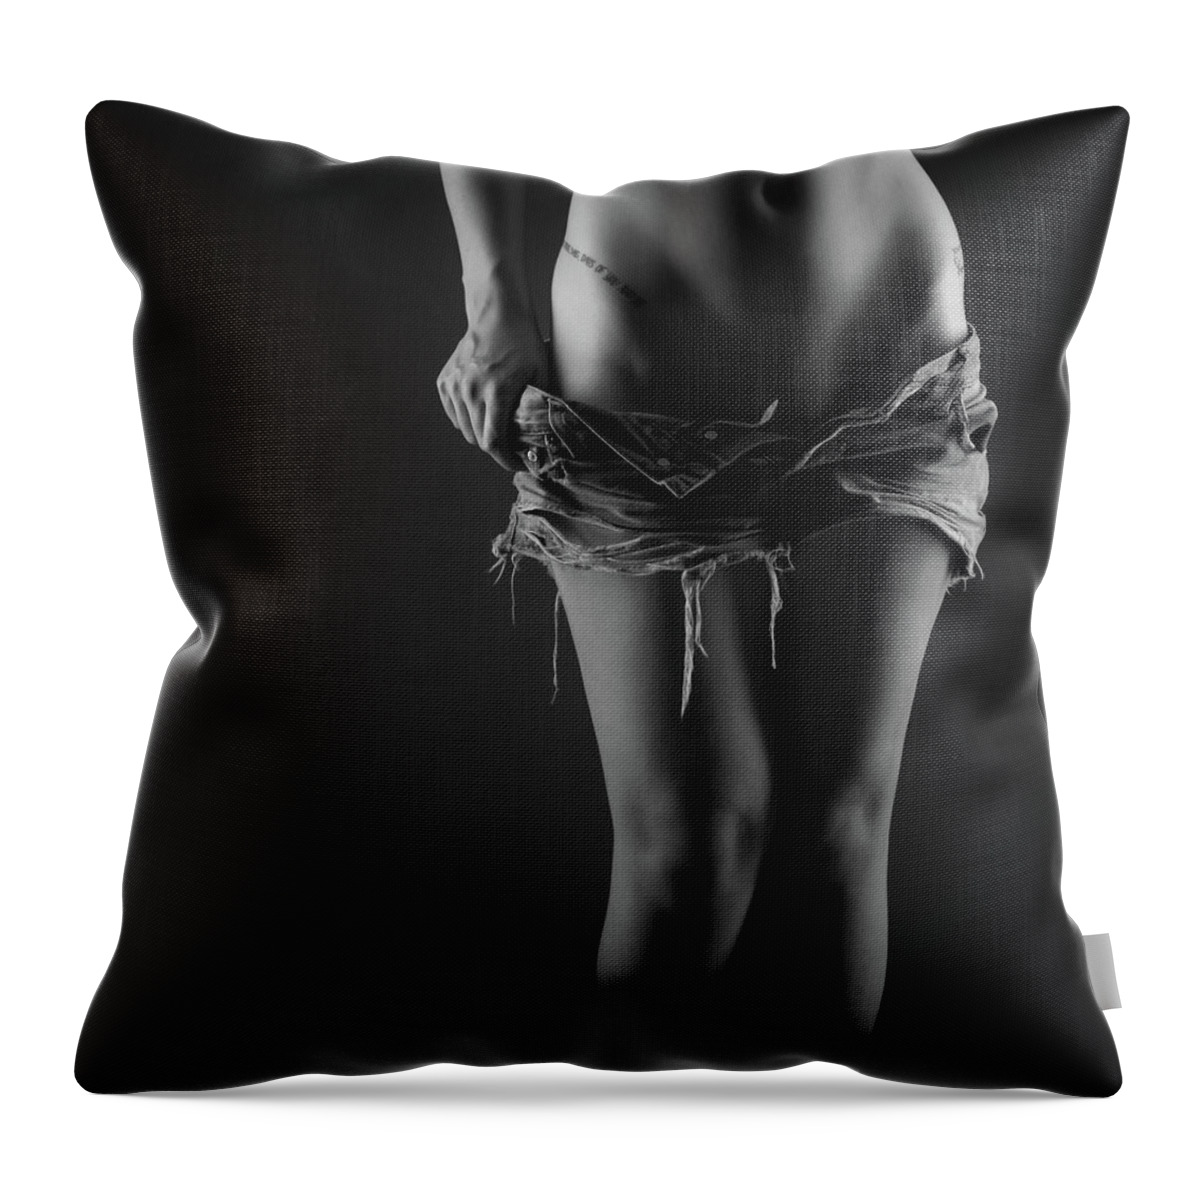 Blue Muse Fine Art Throw Pillow featuring the photograph The Past II by Blue Muse Fine Art